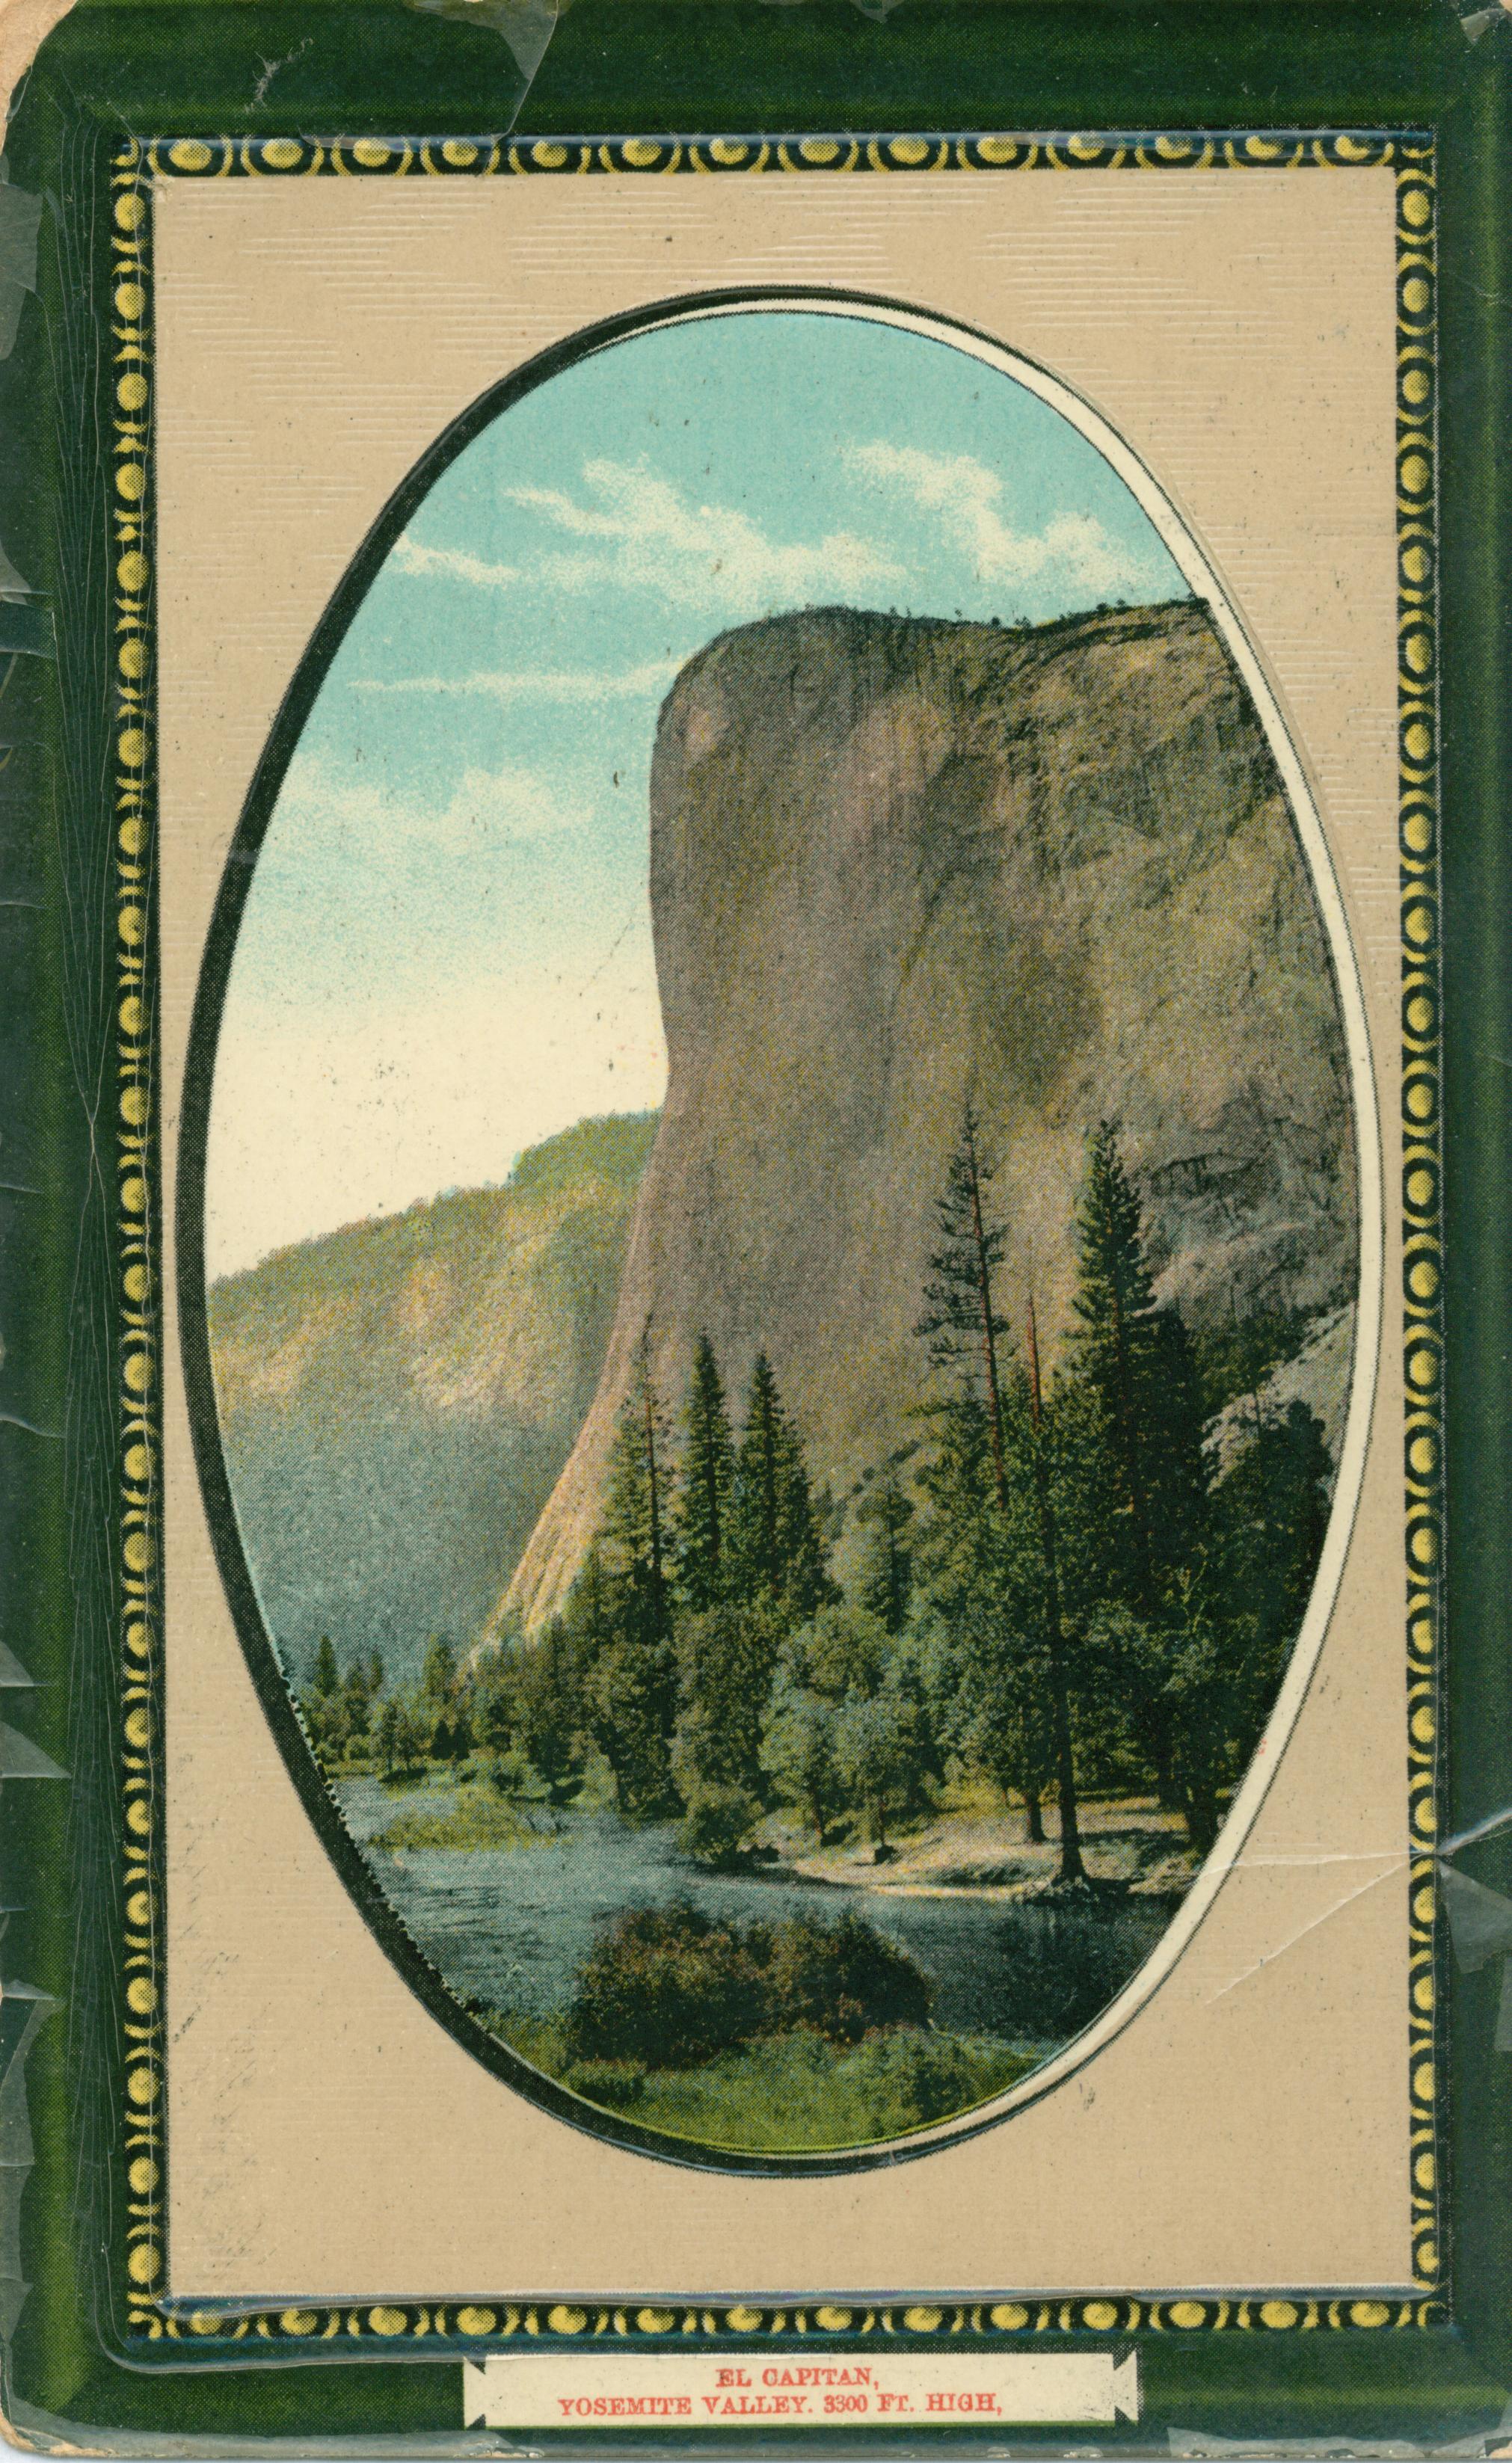 Shows a vignette of El Capitan looming above a tree-lined river